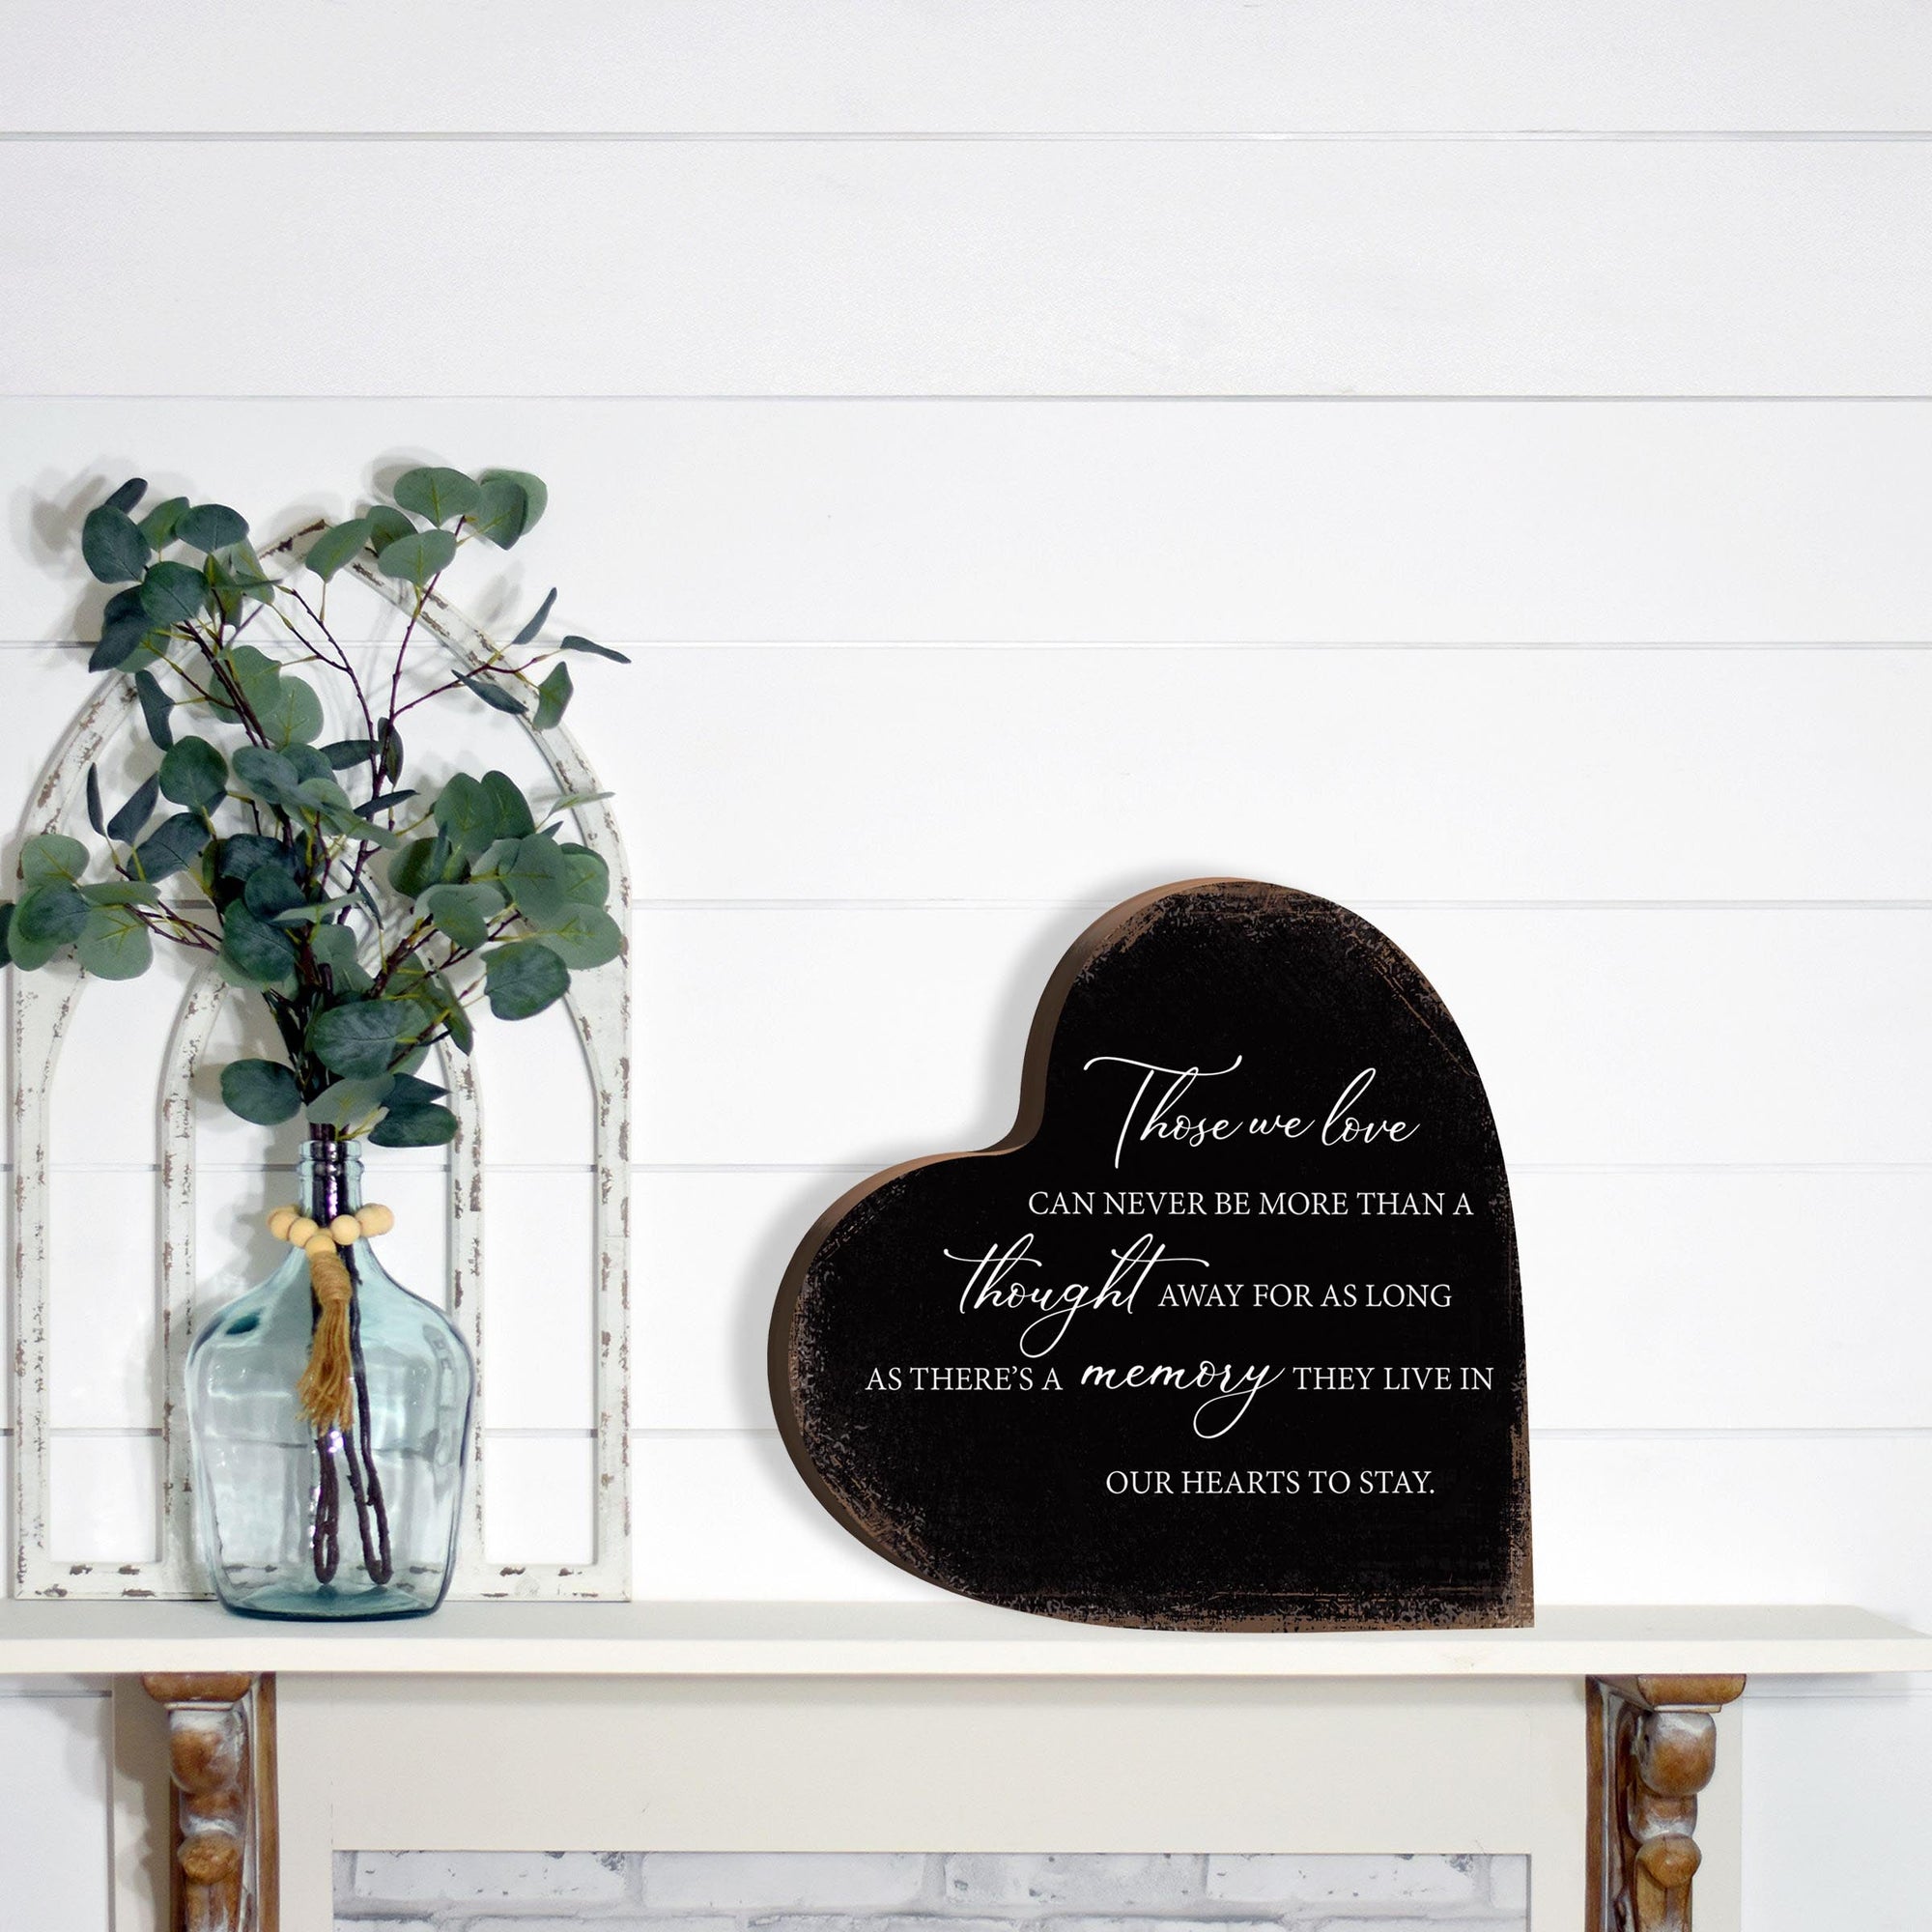 A memorial heart block sign to honor your loved one's legacy, ideal for memorial decorations.